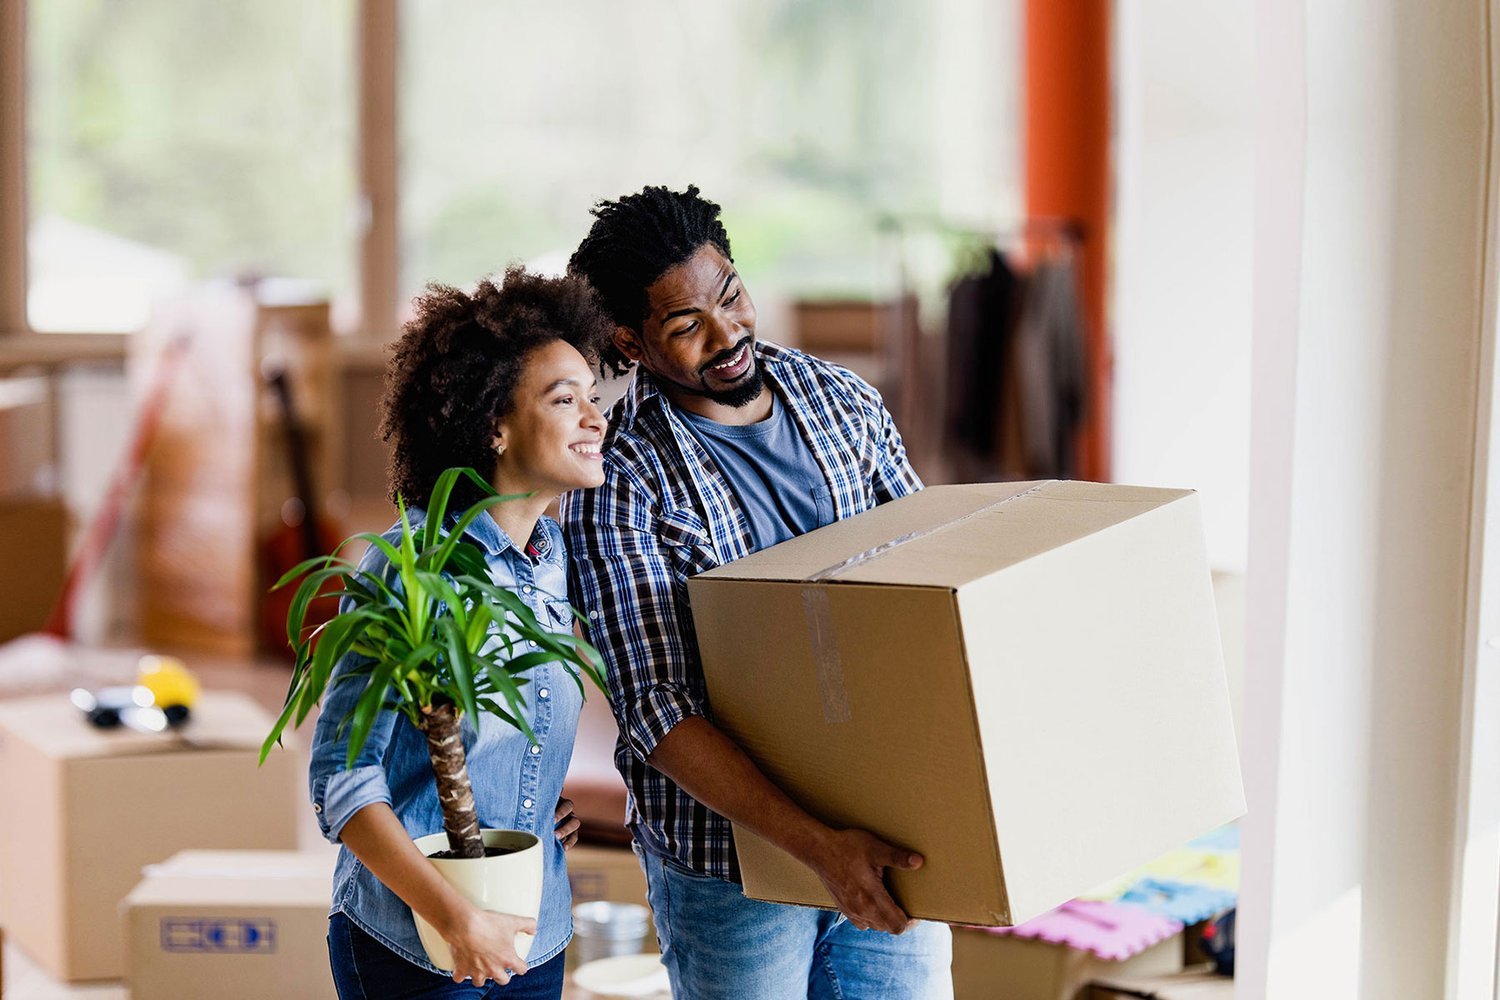 New homeowners: What to buy when you move into a new house